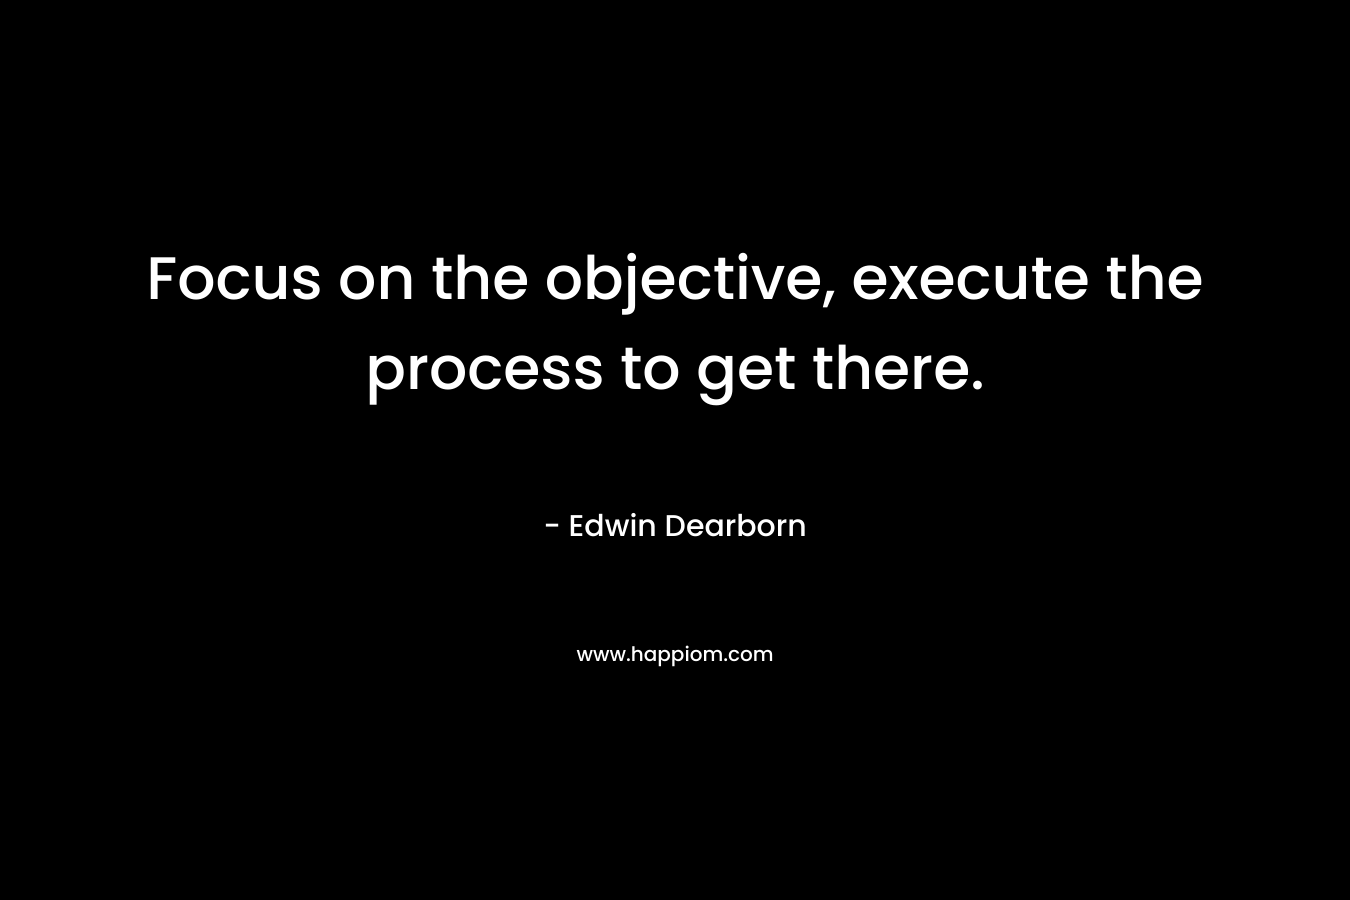 Focus on the objective, execute the process to get there. – Edwin Dearborn